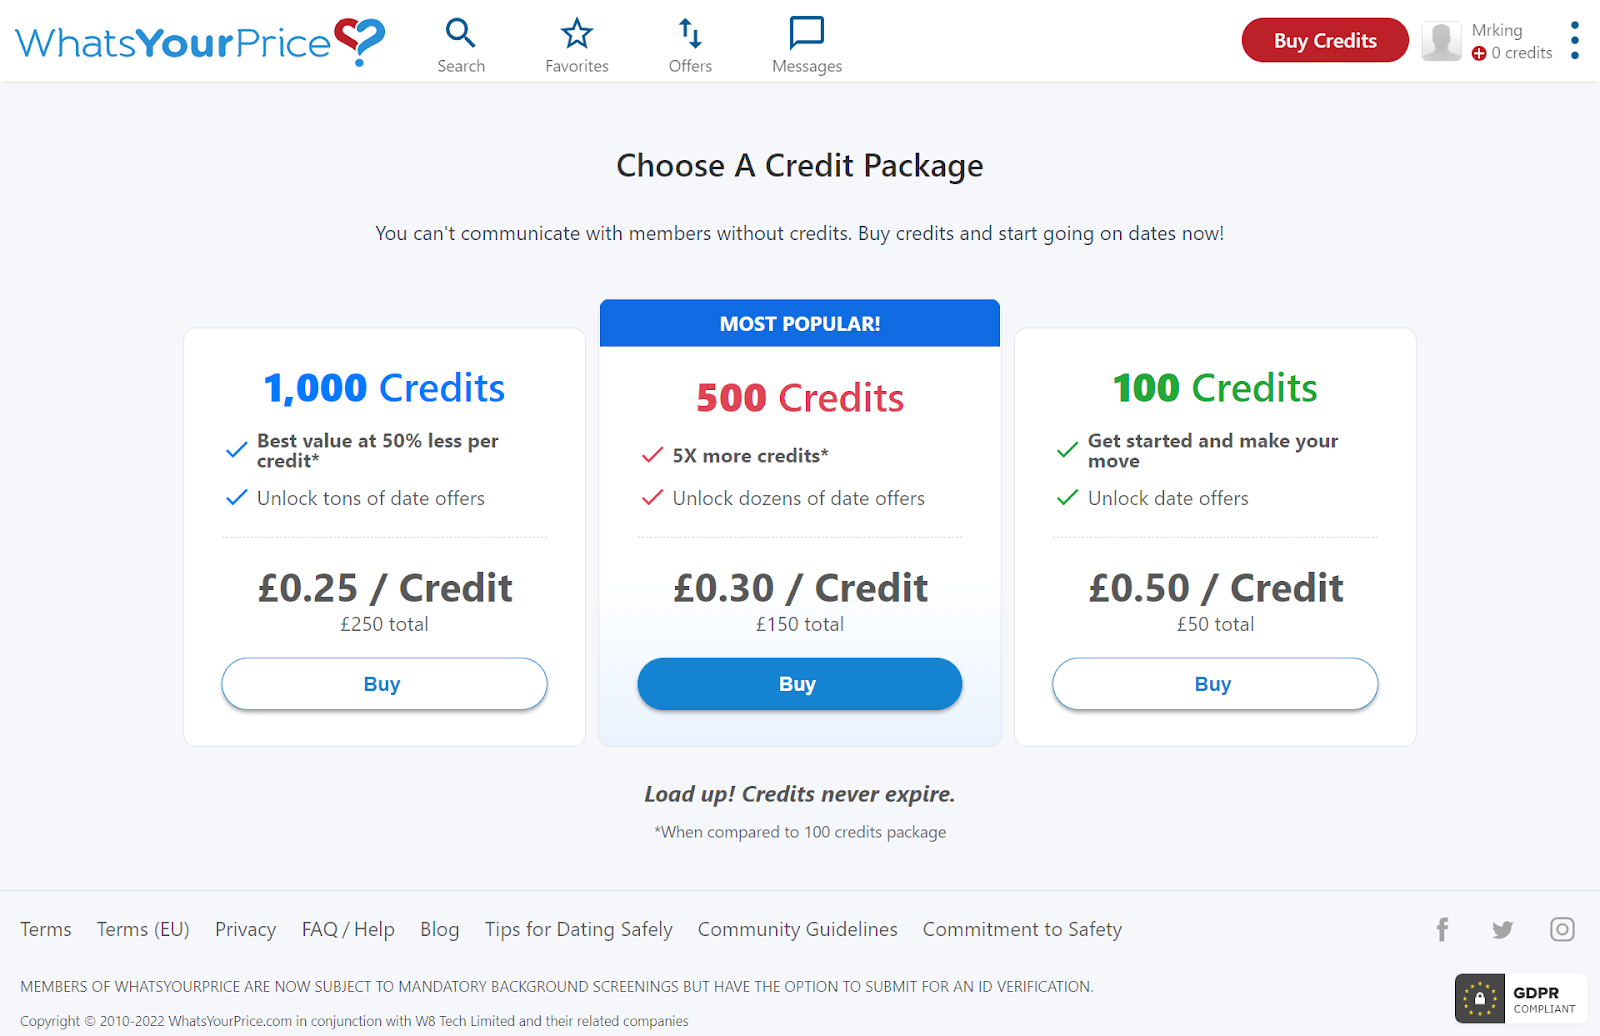 whatsyourprice dating site prices and costs for credit packages